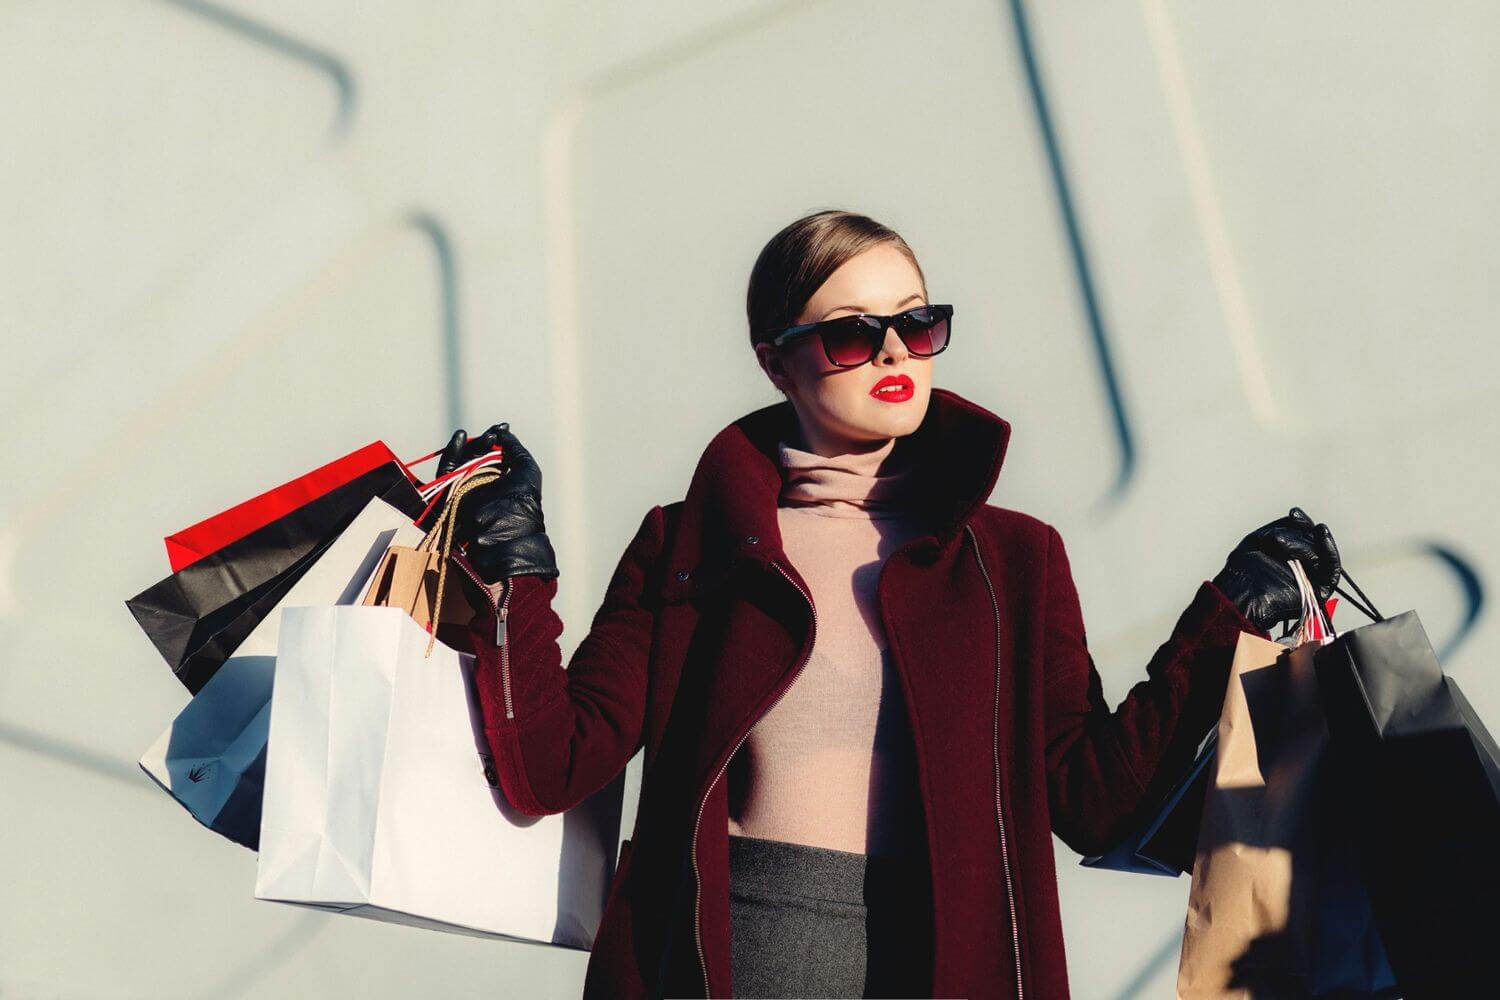 a woman with sunglasses and red liptsick holding multiple shopping bags